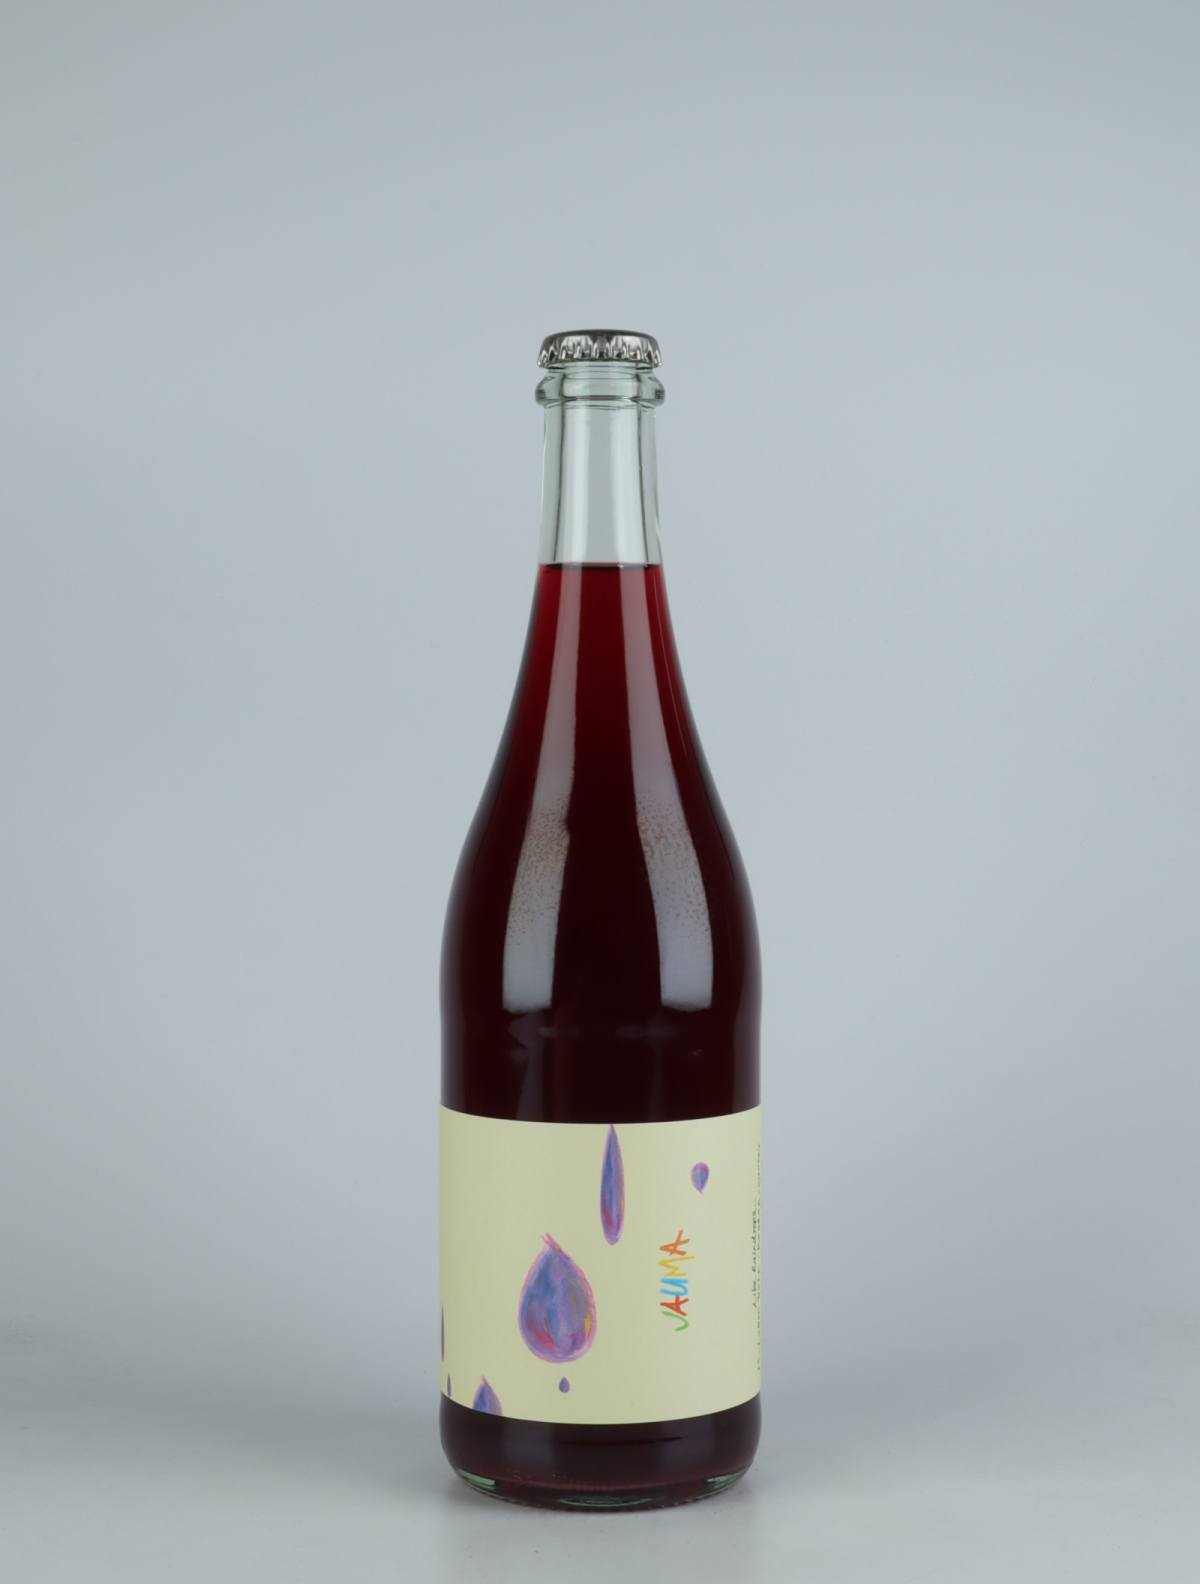 A bottle 2021 Like Raindrops Red wine from Jauma, Adelaide Hills in 